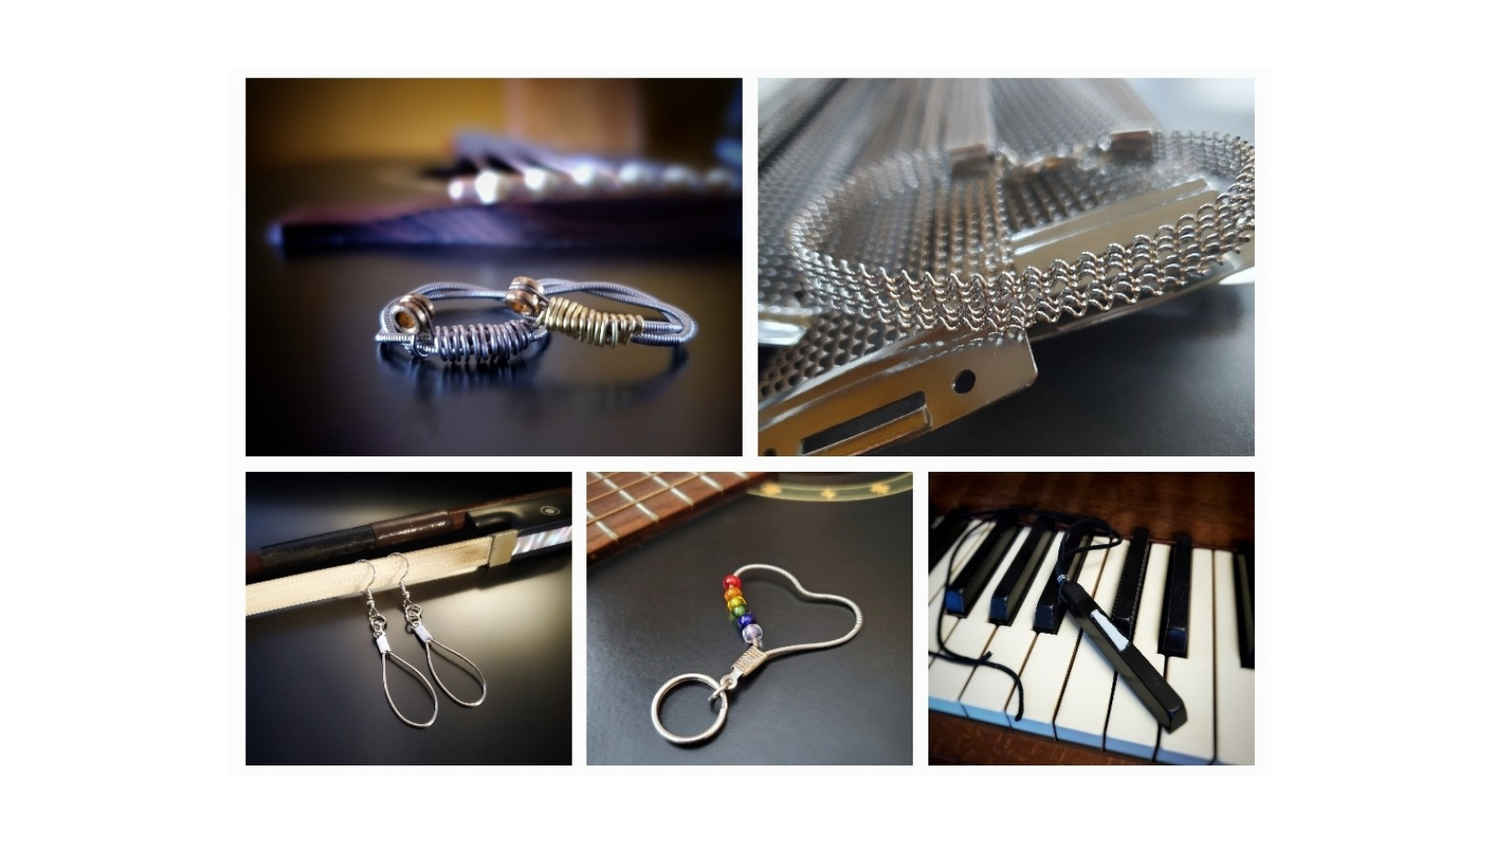 Image of jewelry and a bookmark made from musical instrument strings or parts displayed with their respective instruments